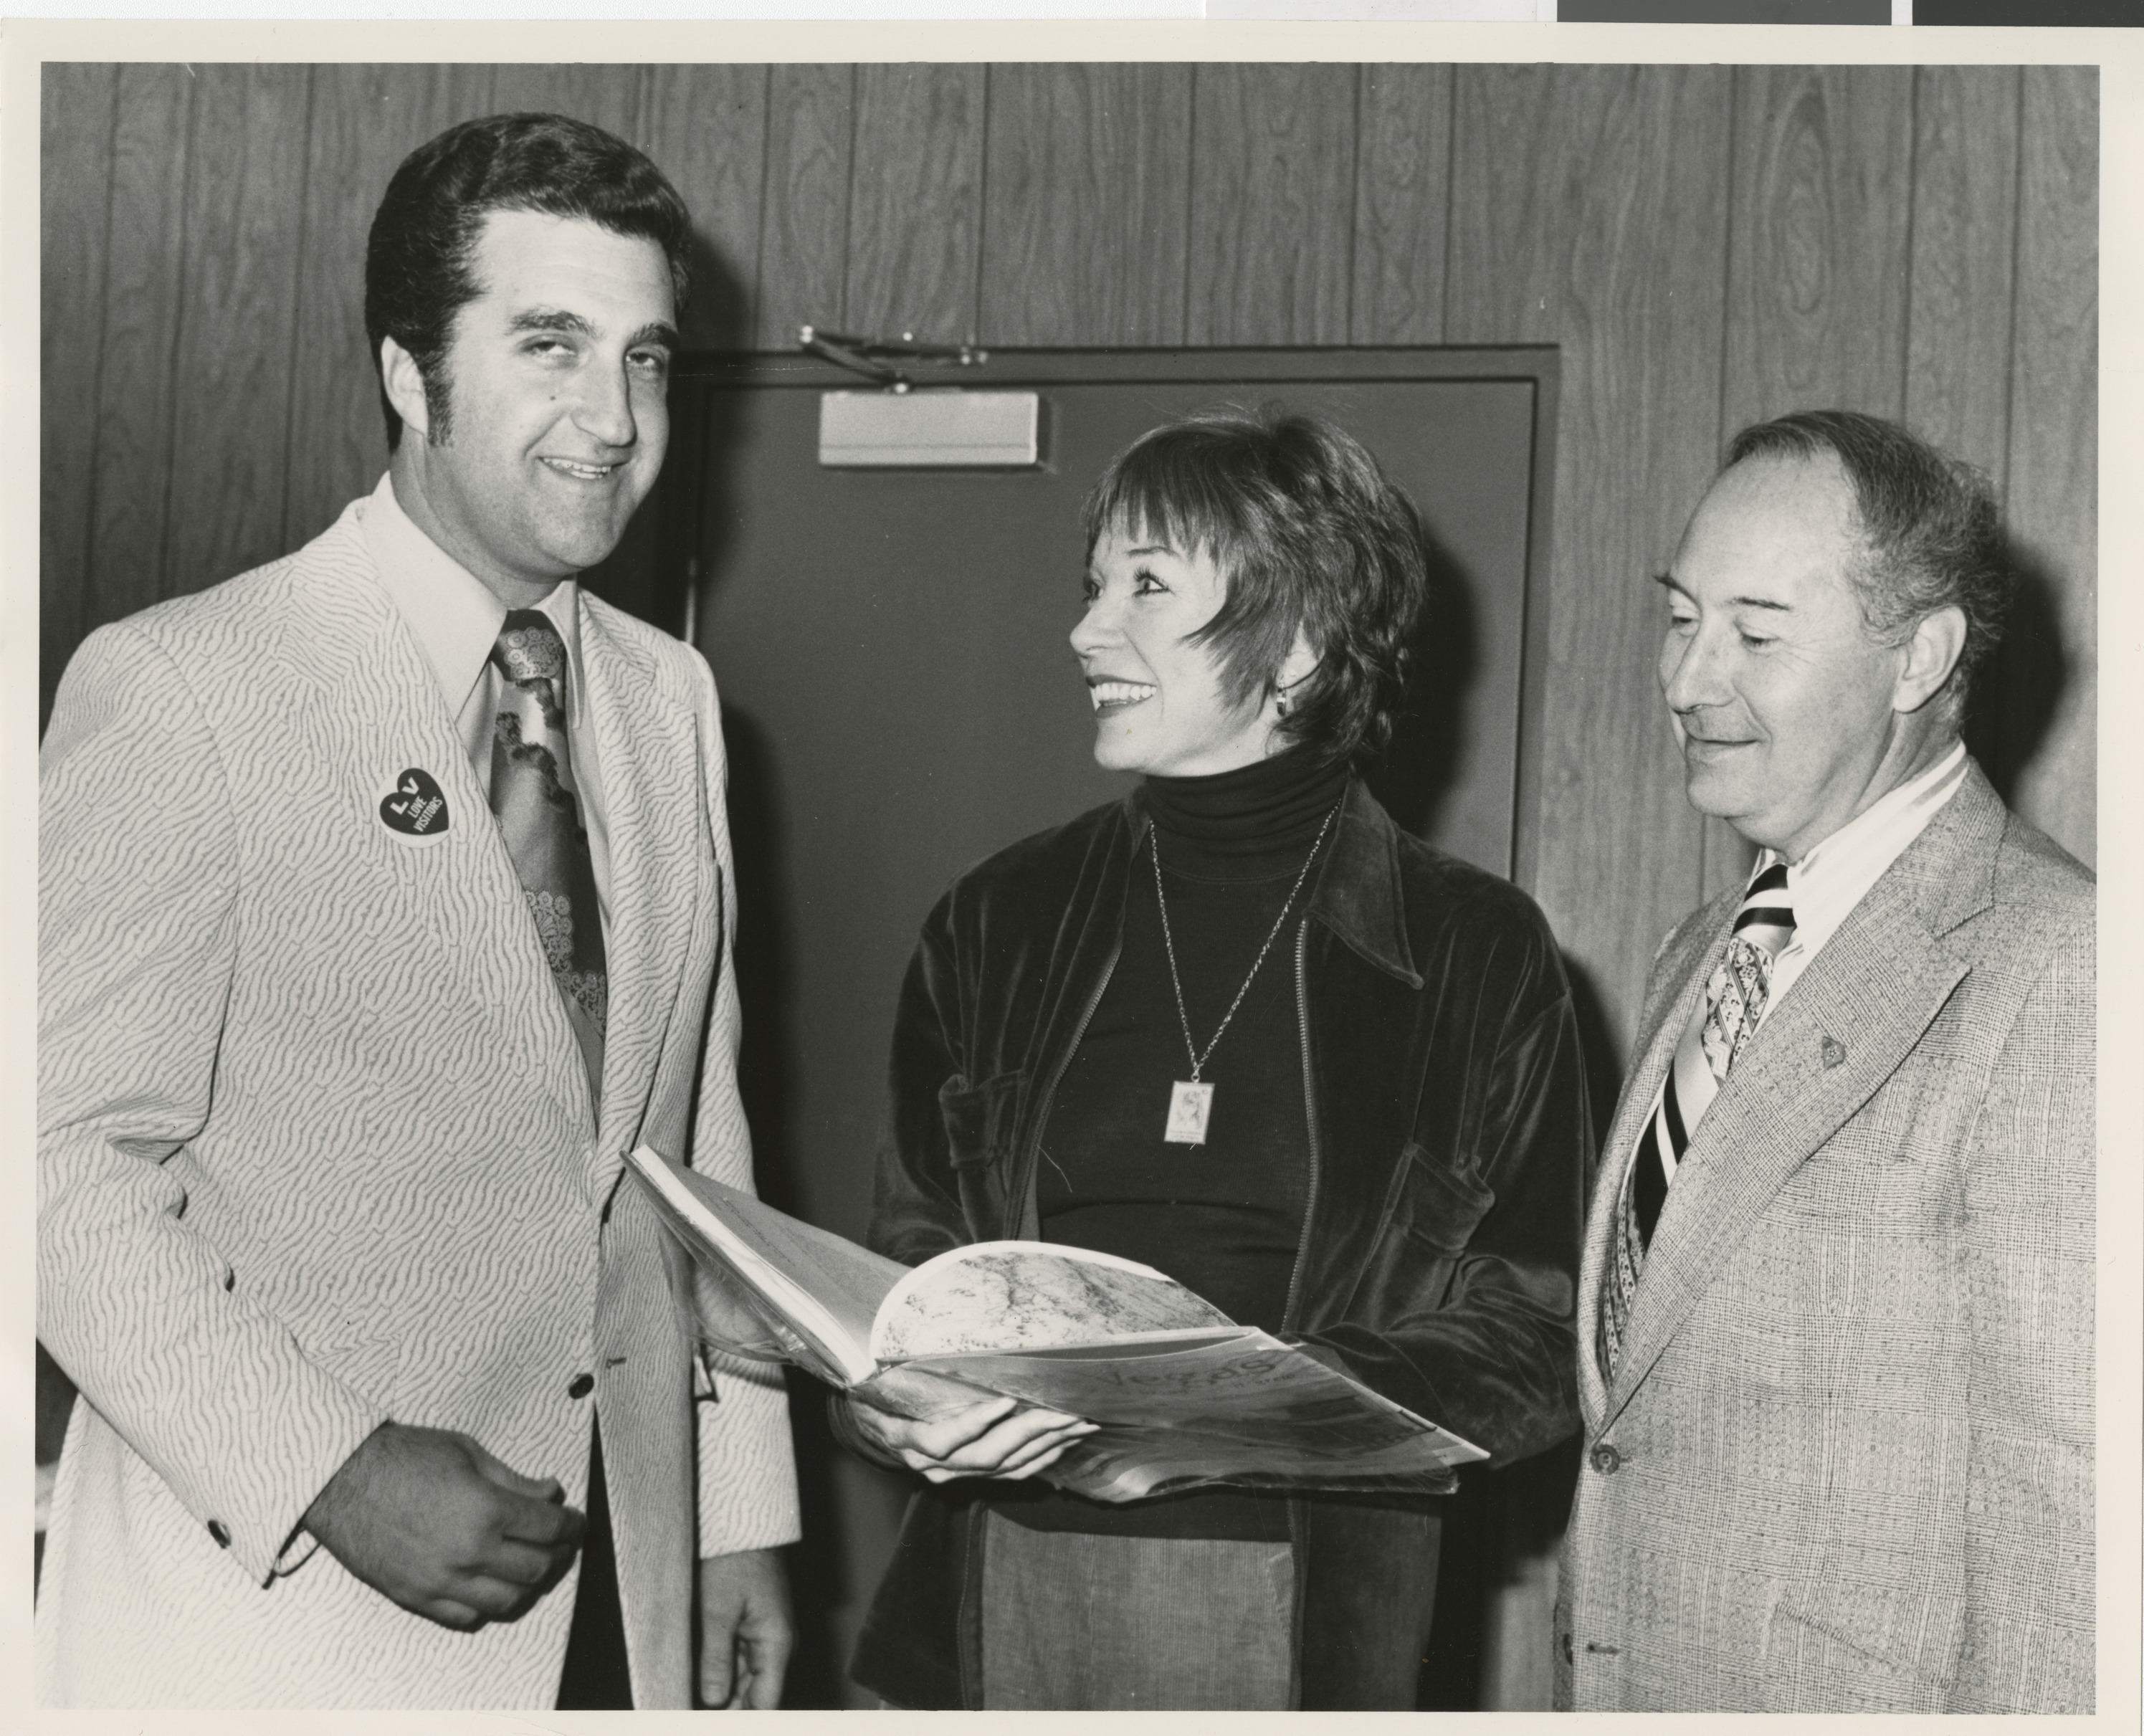 Photograph of Ron Lurie with unidentified couple